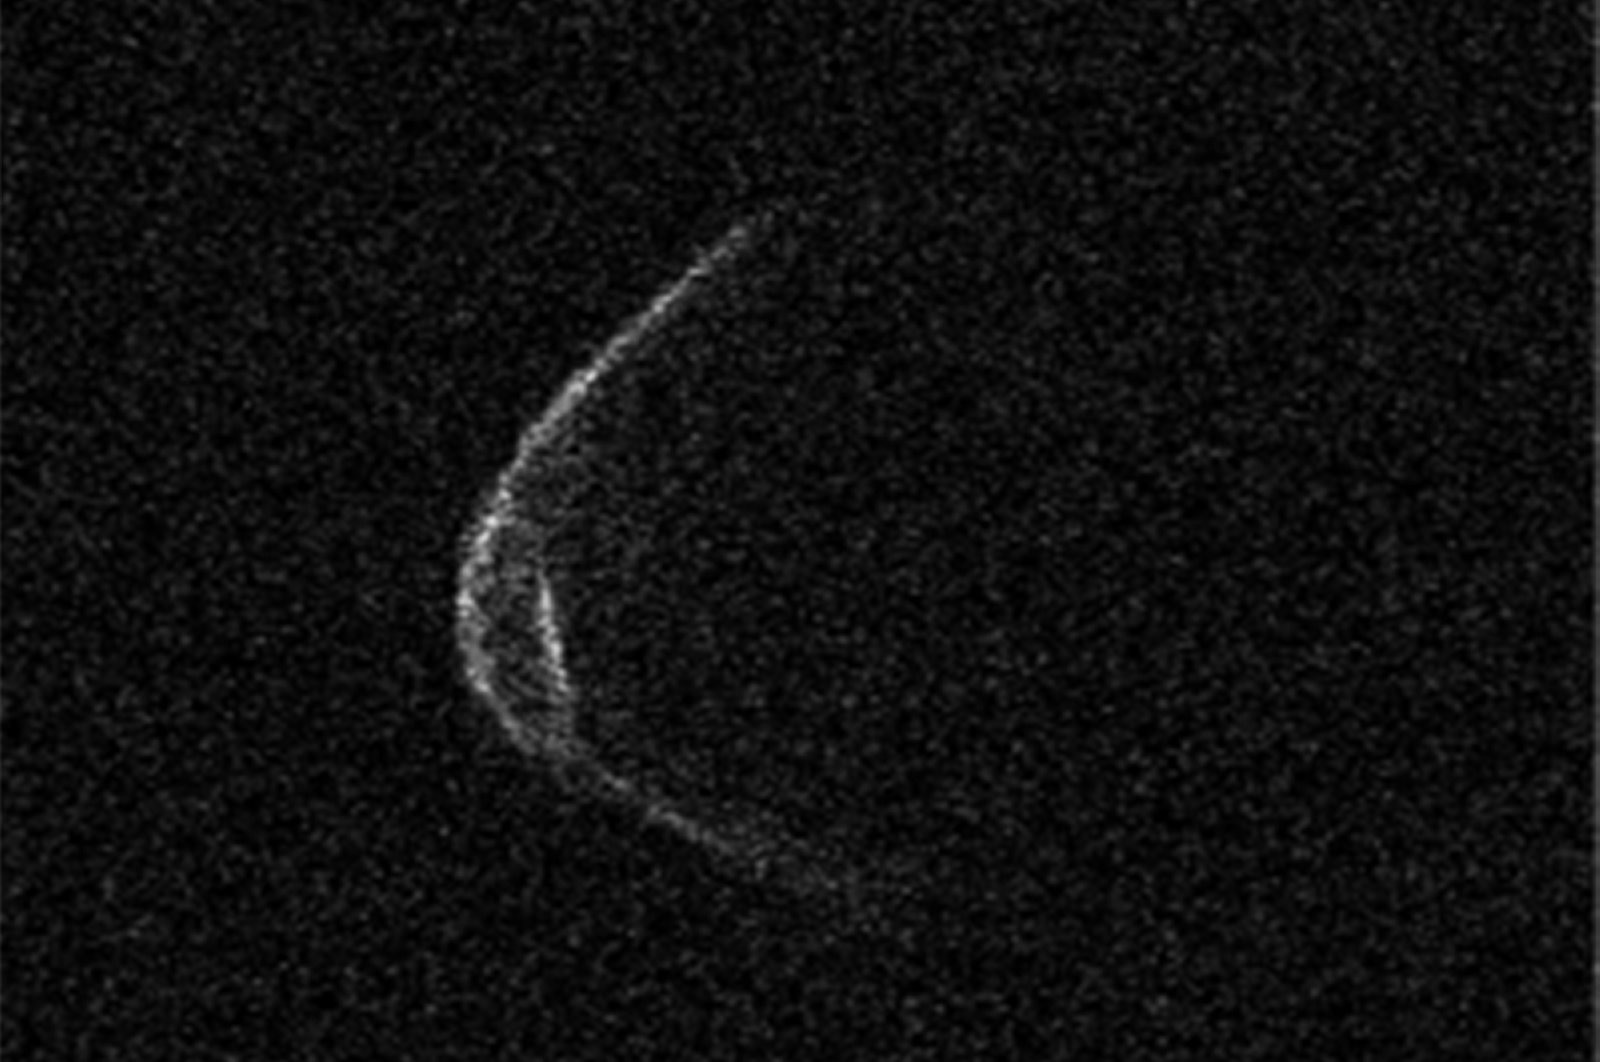 This radar image made available by the Arecibo Observatory in Puerto Rico shows asteroid 1998 OR2 on April 17, 2020. (AP Photo)